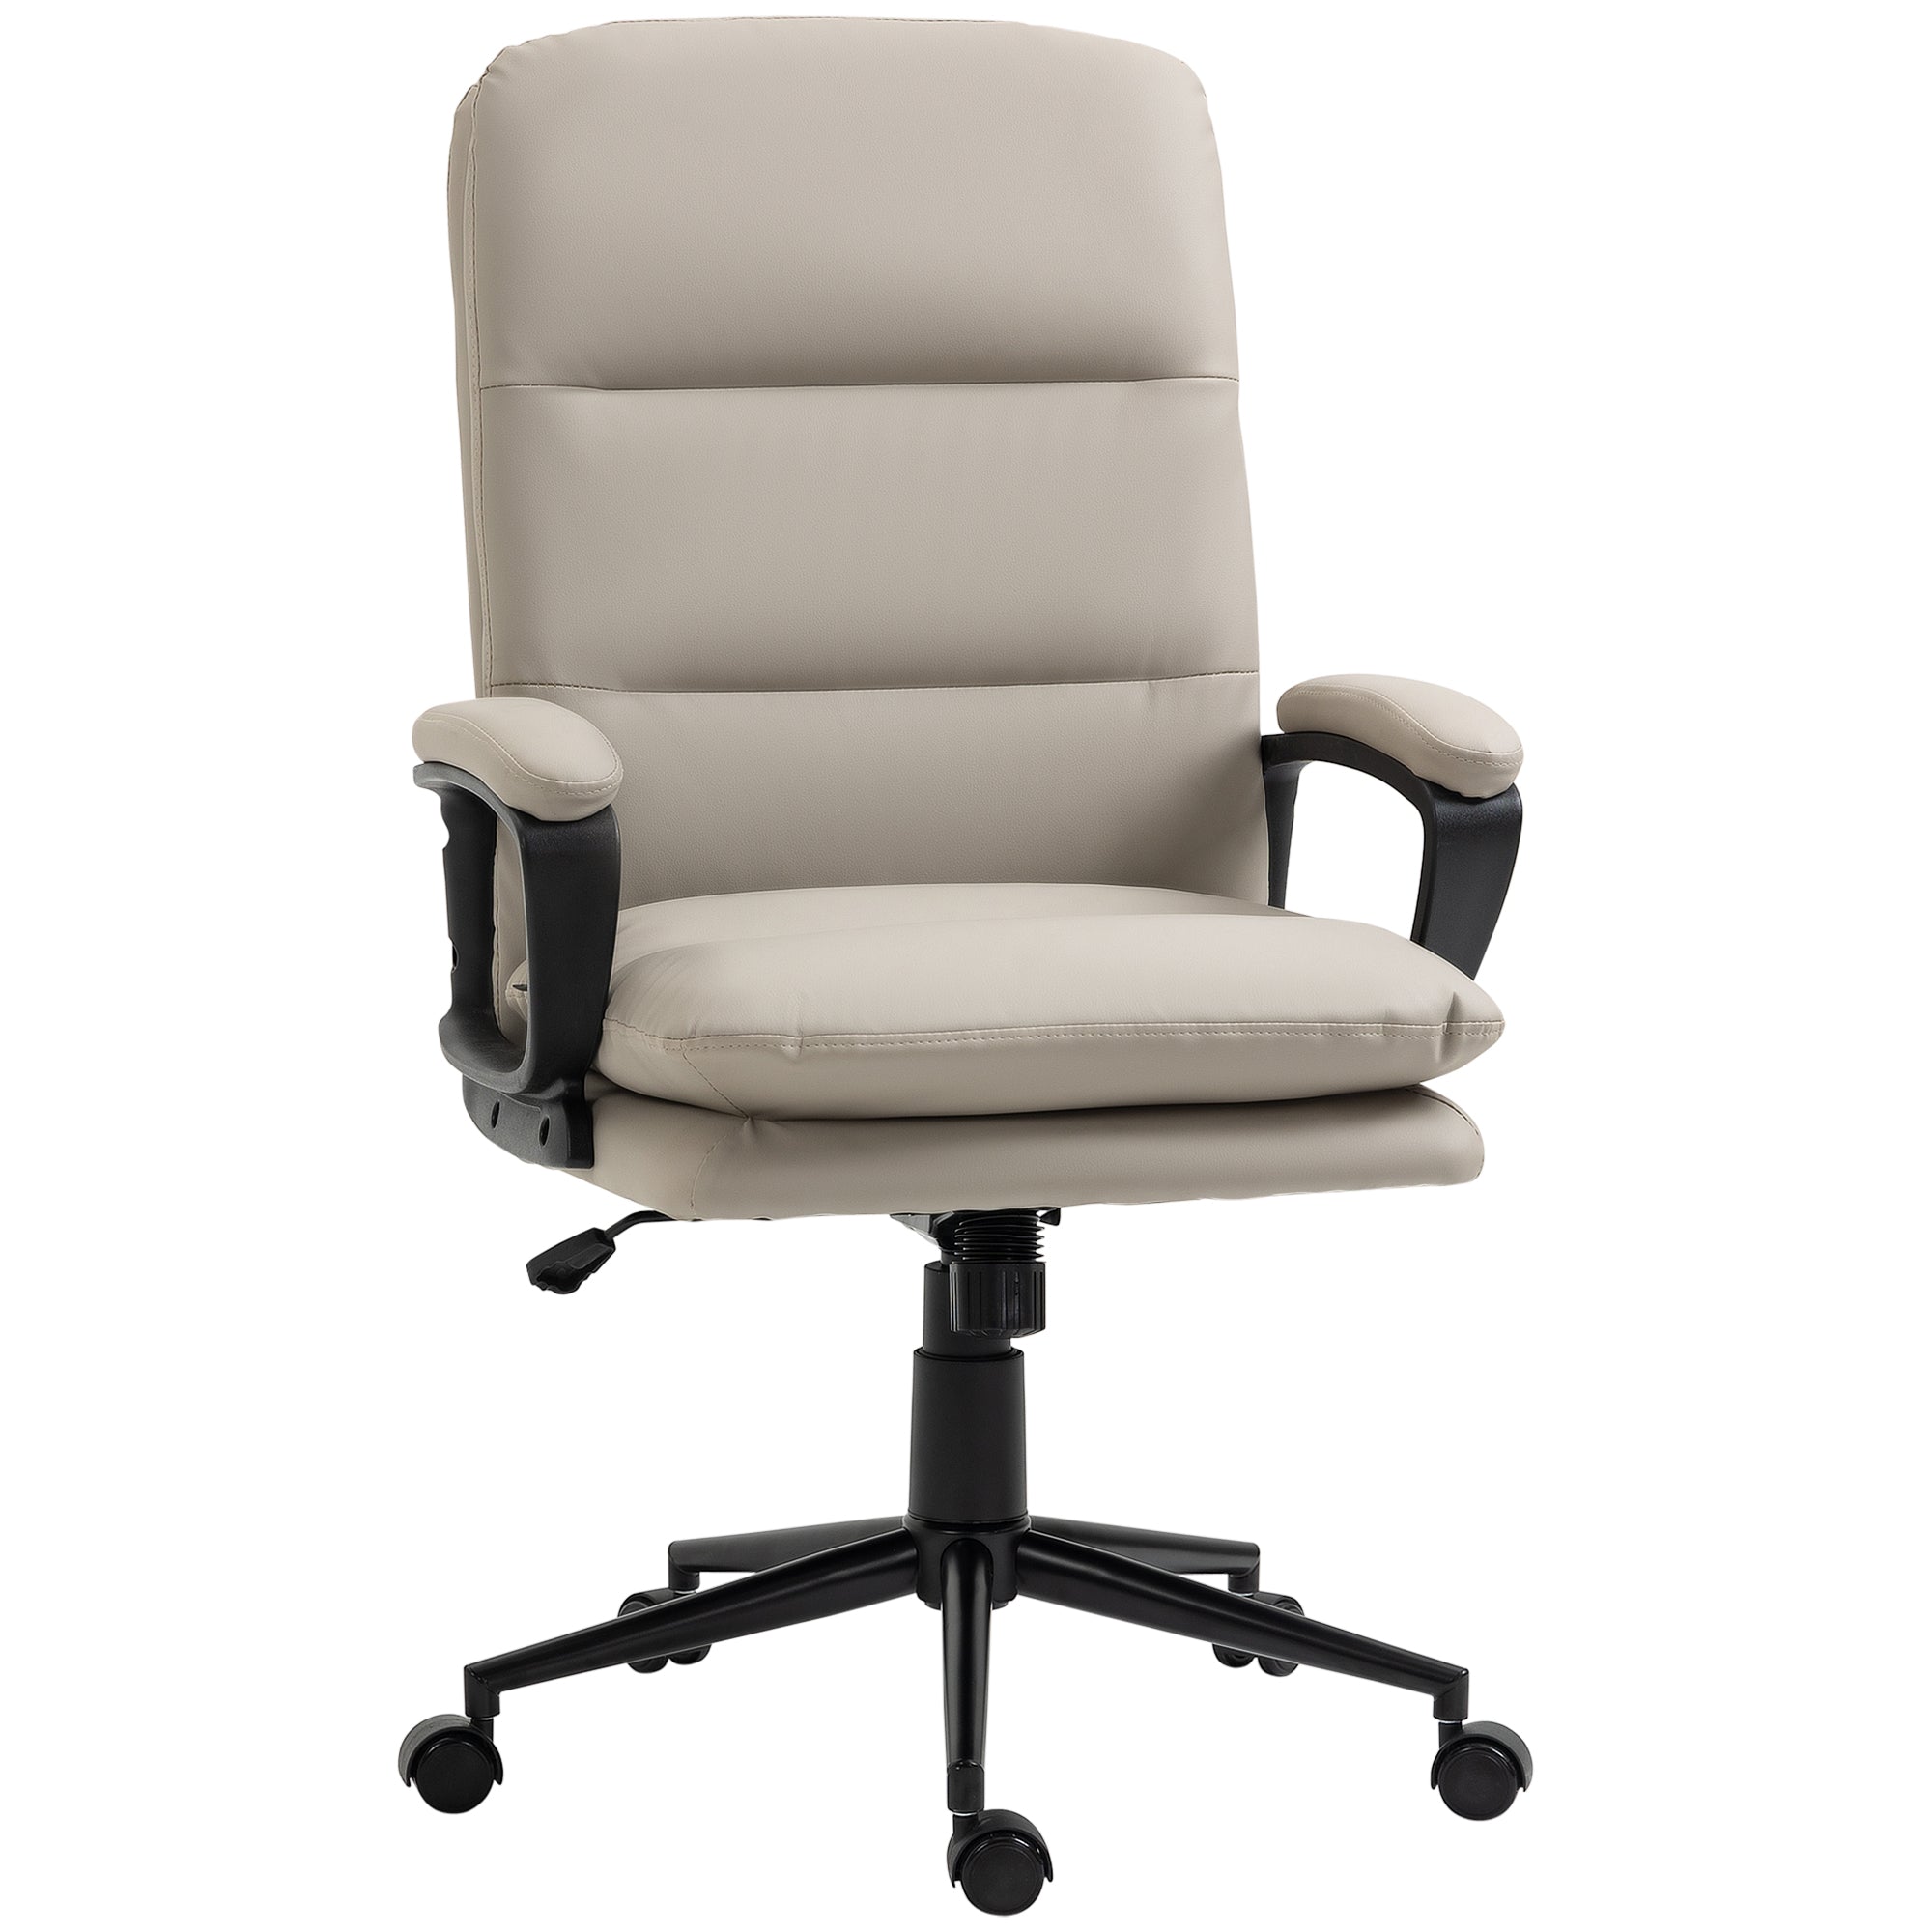 Vinsetto Ergonomic Computer Desk Chair - PU Leather Office Chair with Adjustable Height and Swivel Rolling Wheels for Work Study - Light Grey  | TJ Hu